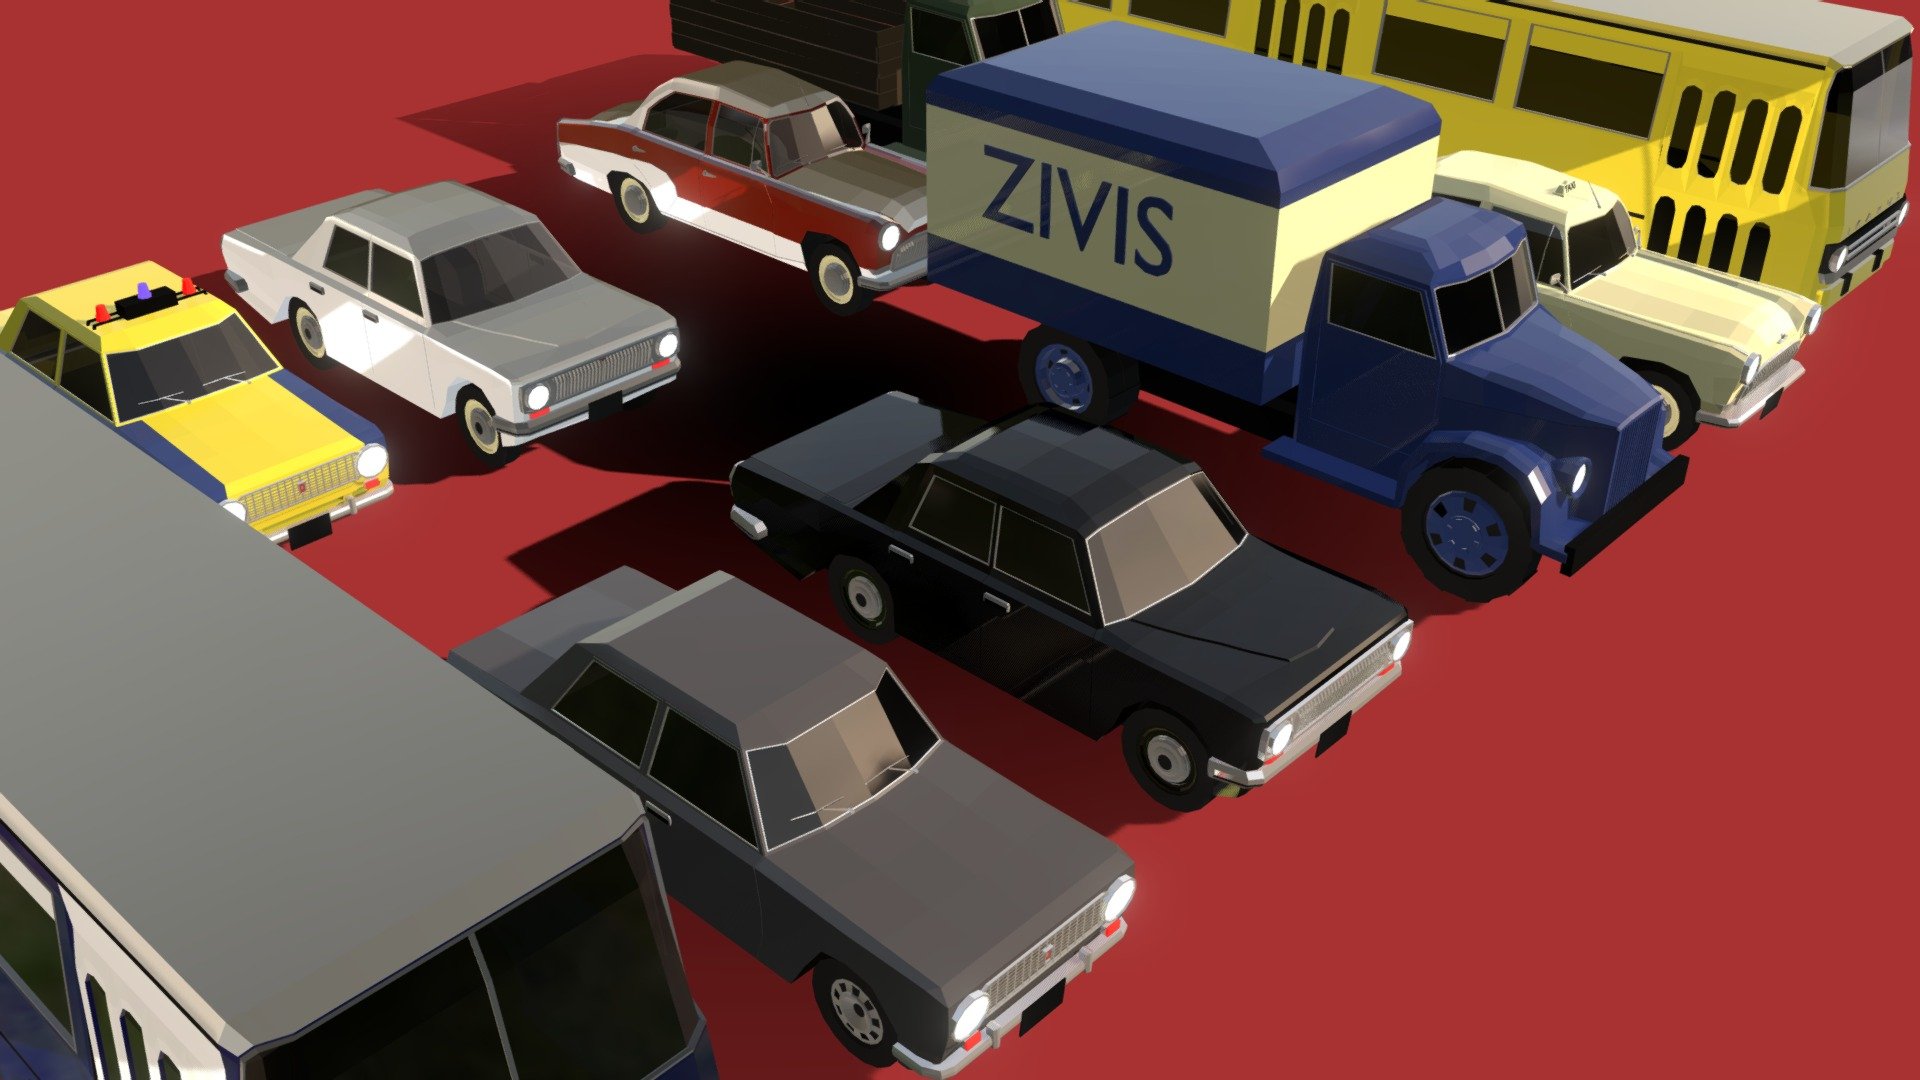 The first collection in a series of low poly asset packs for animations or games.Based on Soviet era vehicles, GAZ, Lada, Ikarus. 
Contains: 1 Lada style sedan, 1 Lada style police car, 1 GAZ M21 style taxi, 1 GAZ M21 style sedan, 2 GAZ 24 style sedans, 2 Ikarus style buses, 2 GAZ 21 Style trucks.
Materials should be easy to change in any 3D software 3d model